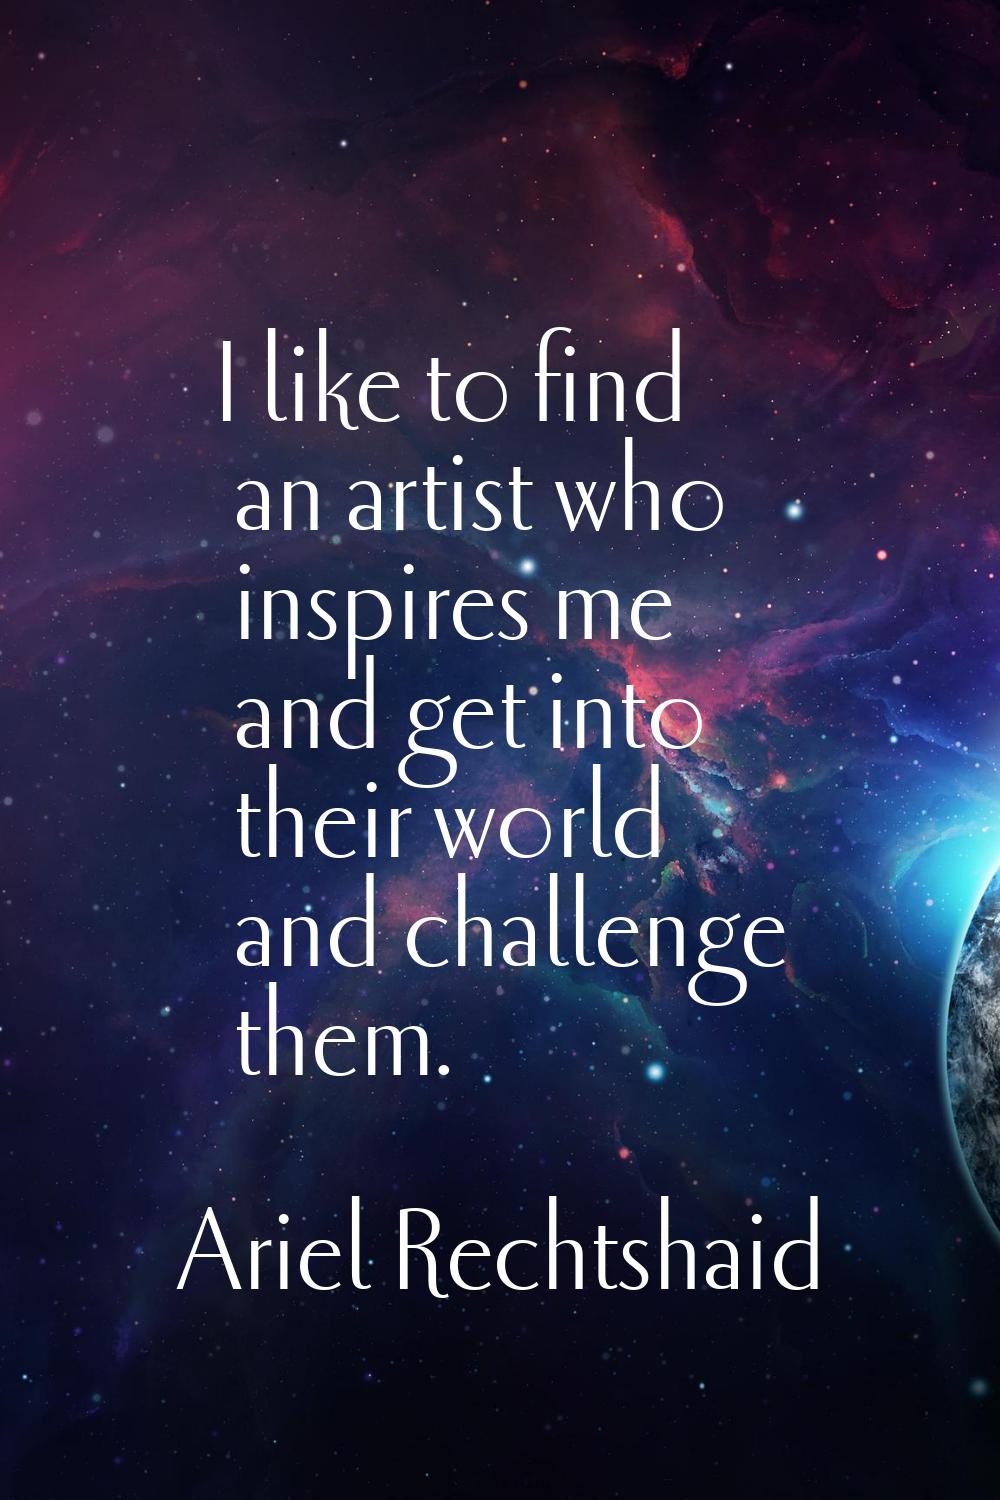 I like to find an artist who inspires me and get into their world and challenge them.